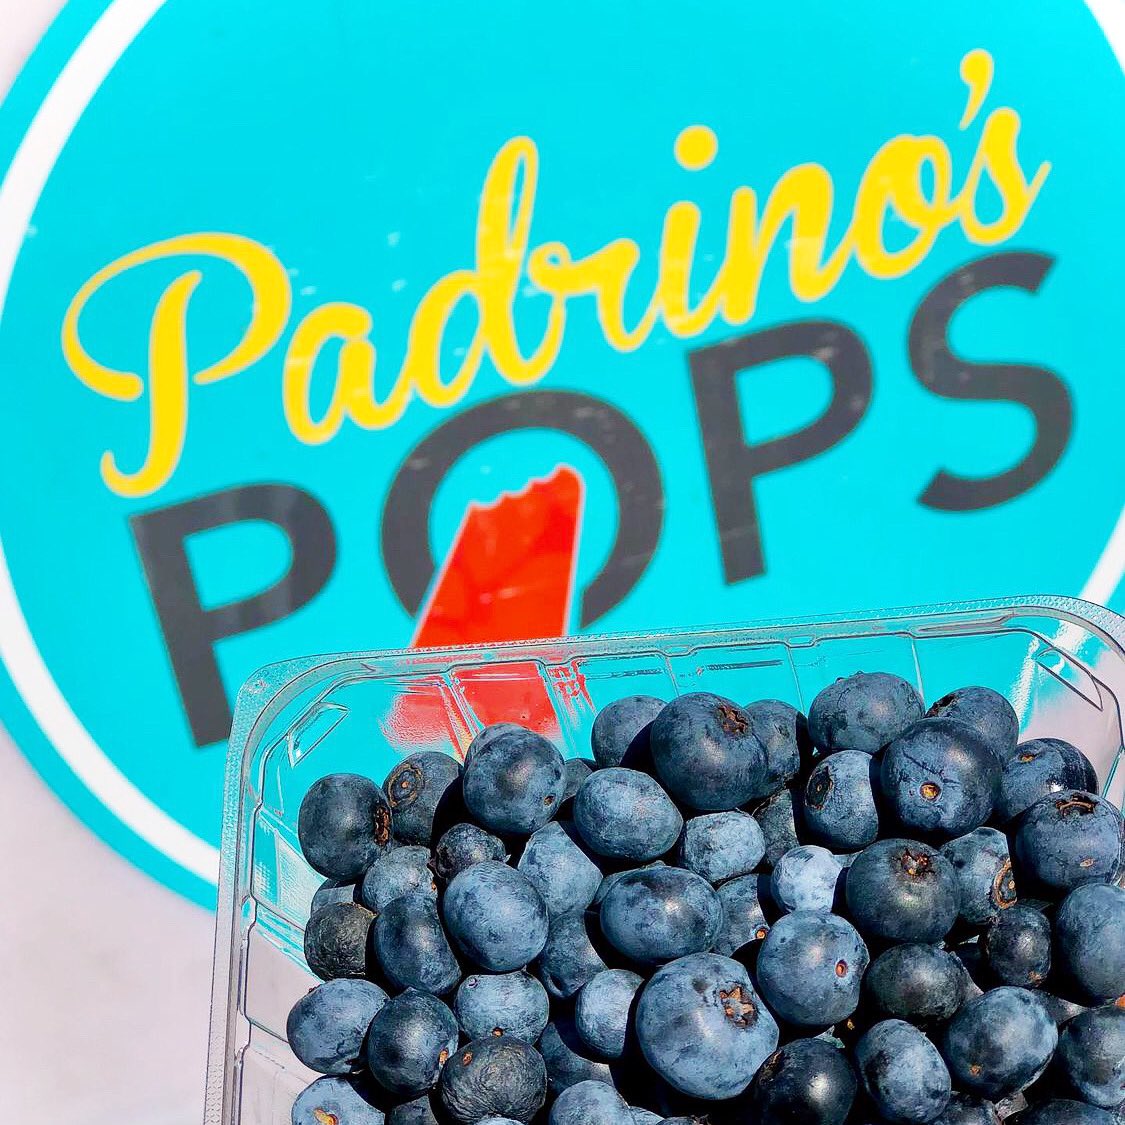 ✨Vendor Highlight✨
Every summer market needs ice-cold popsicles from the sweetest family business! Starting this Tuesday, @Padrinospops will be at the Five Points Franklin Market with their delicious, real fruit and local cream Paletas 🍓🫐🍋
📷: @Padrinospops